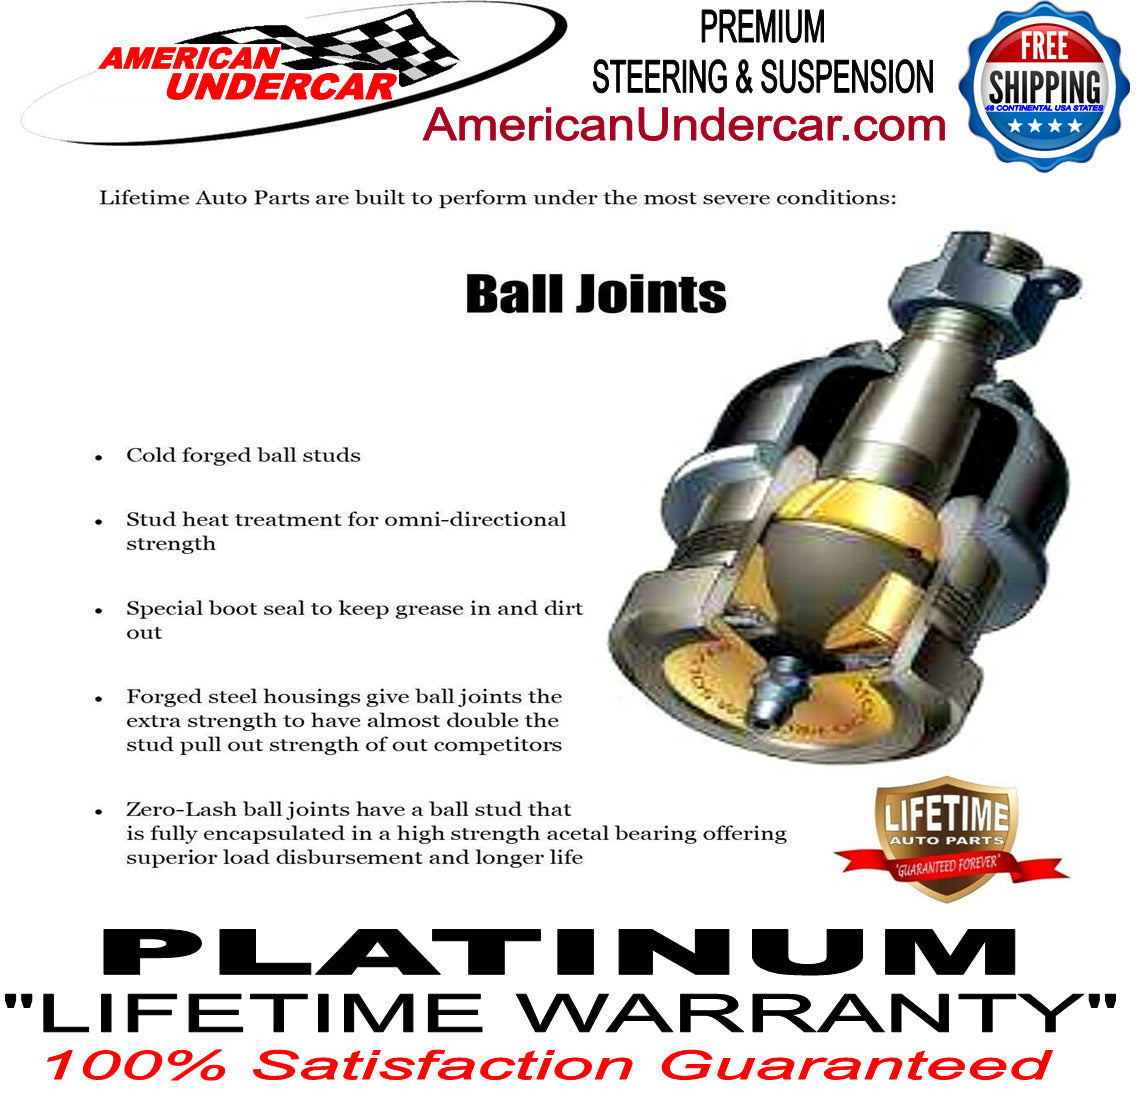 Lifetime Lower Ball Joint Suspension Kit for 2007-2013 Chevrolet, GMC, Cadillac 2WD, 4x4